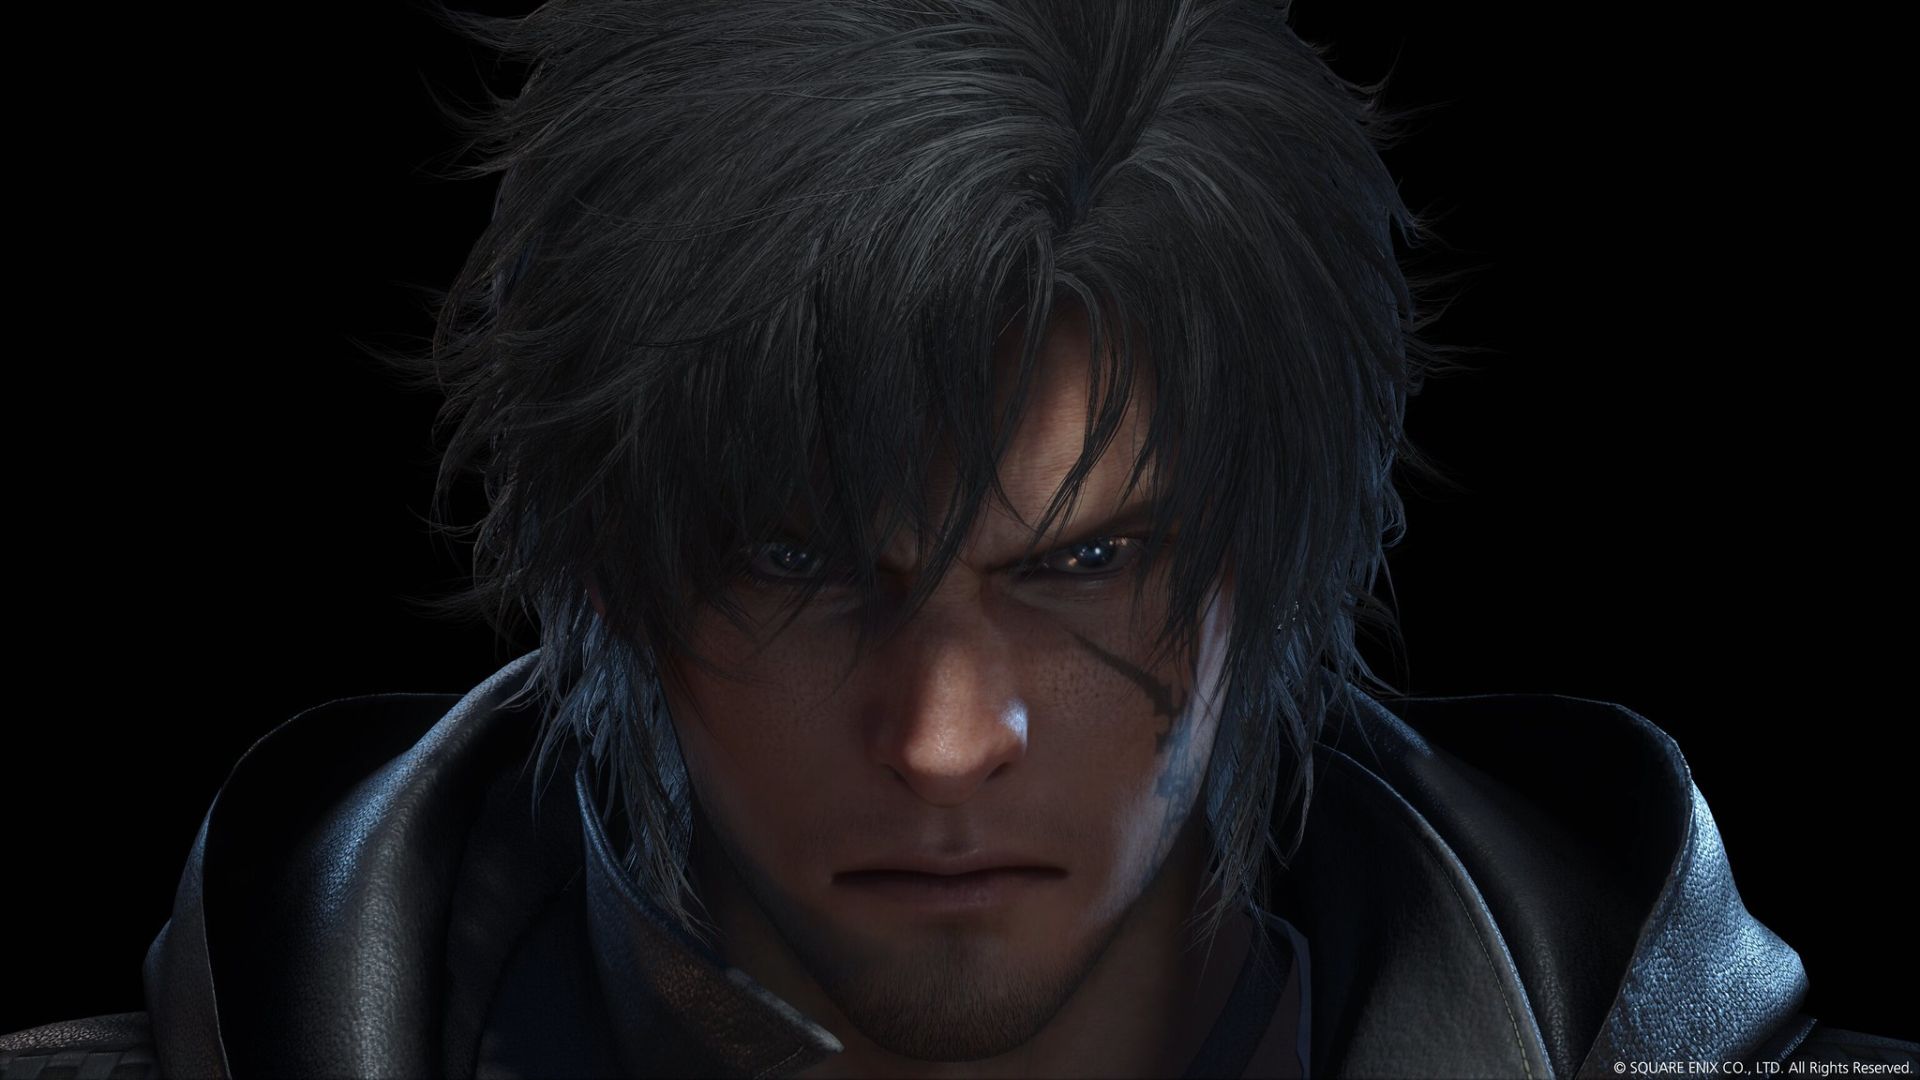 Final Fantasy 16 – More Details Coming in 2021, Producer and Director